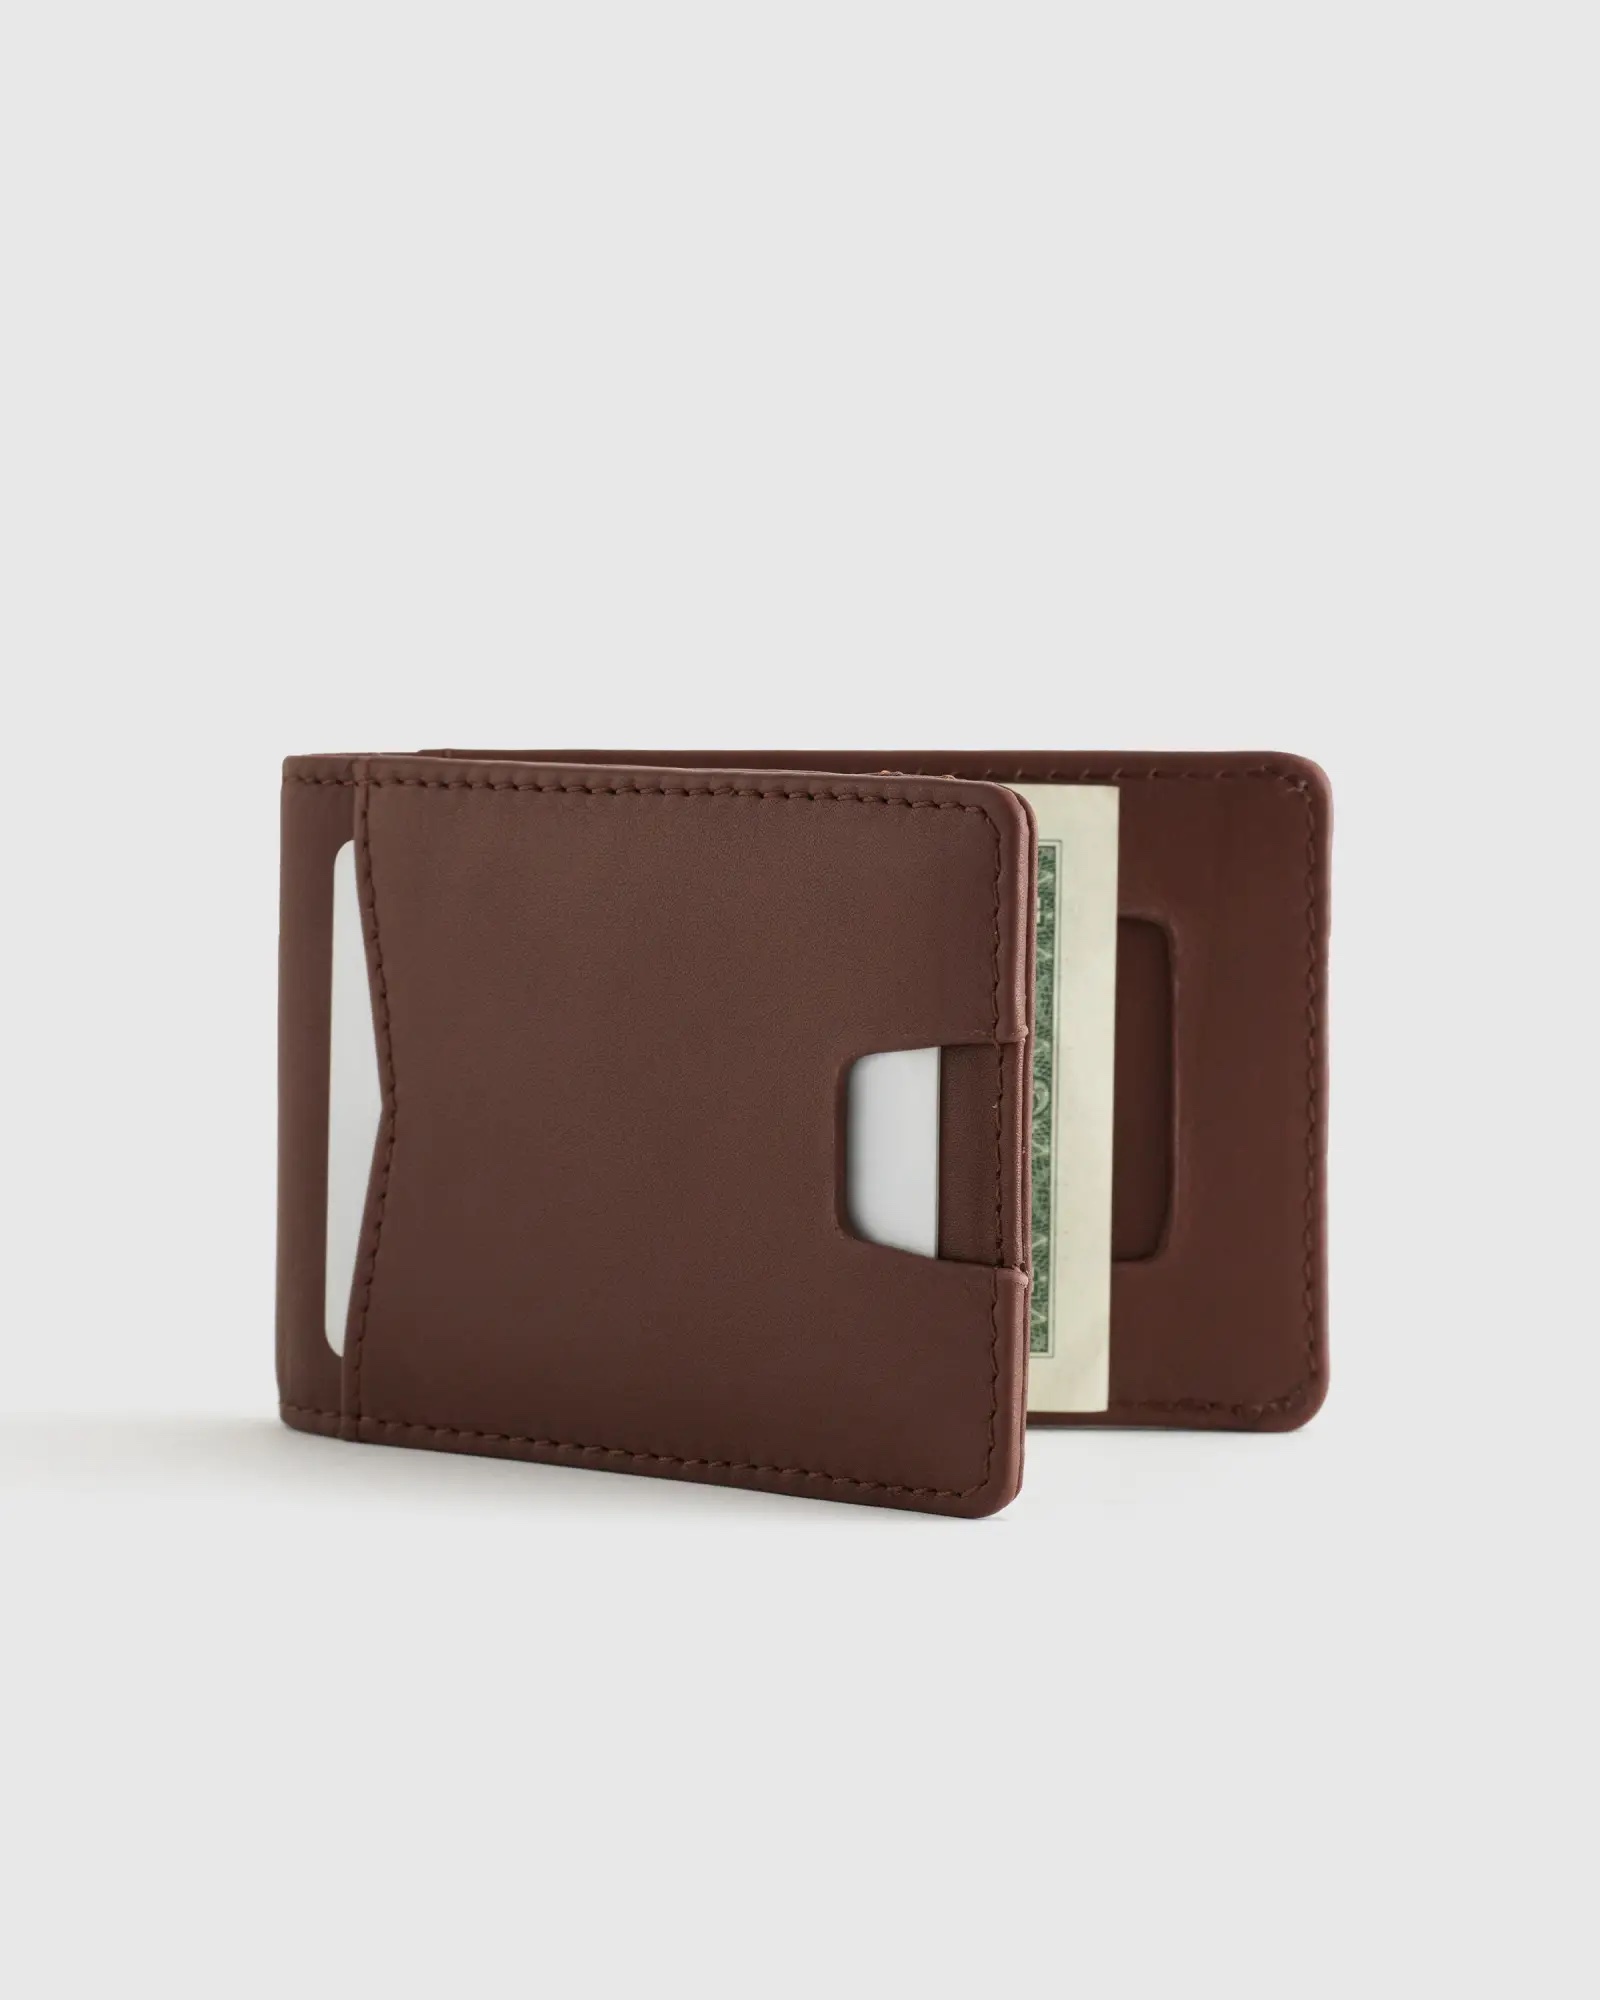 8 Best Sustainable Wallets For Men In 2023 - The Good Trade